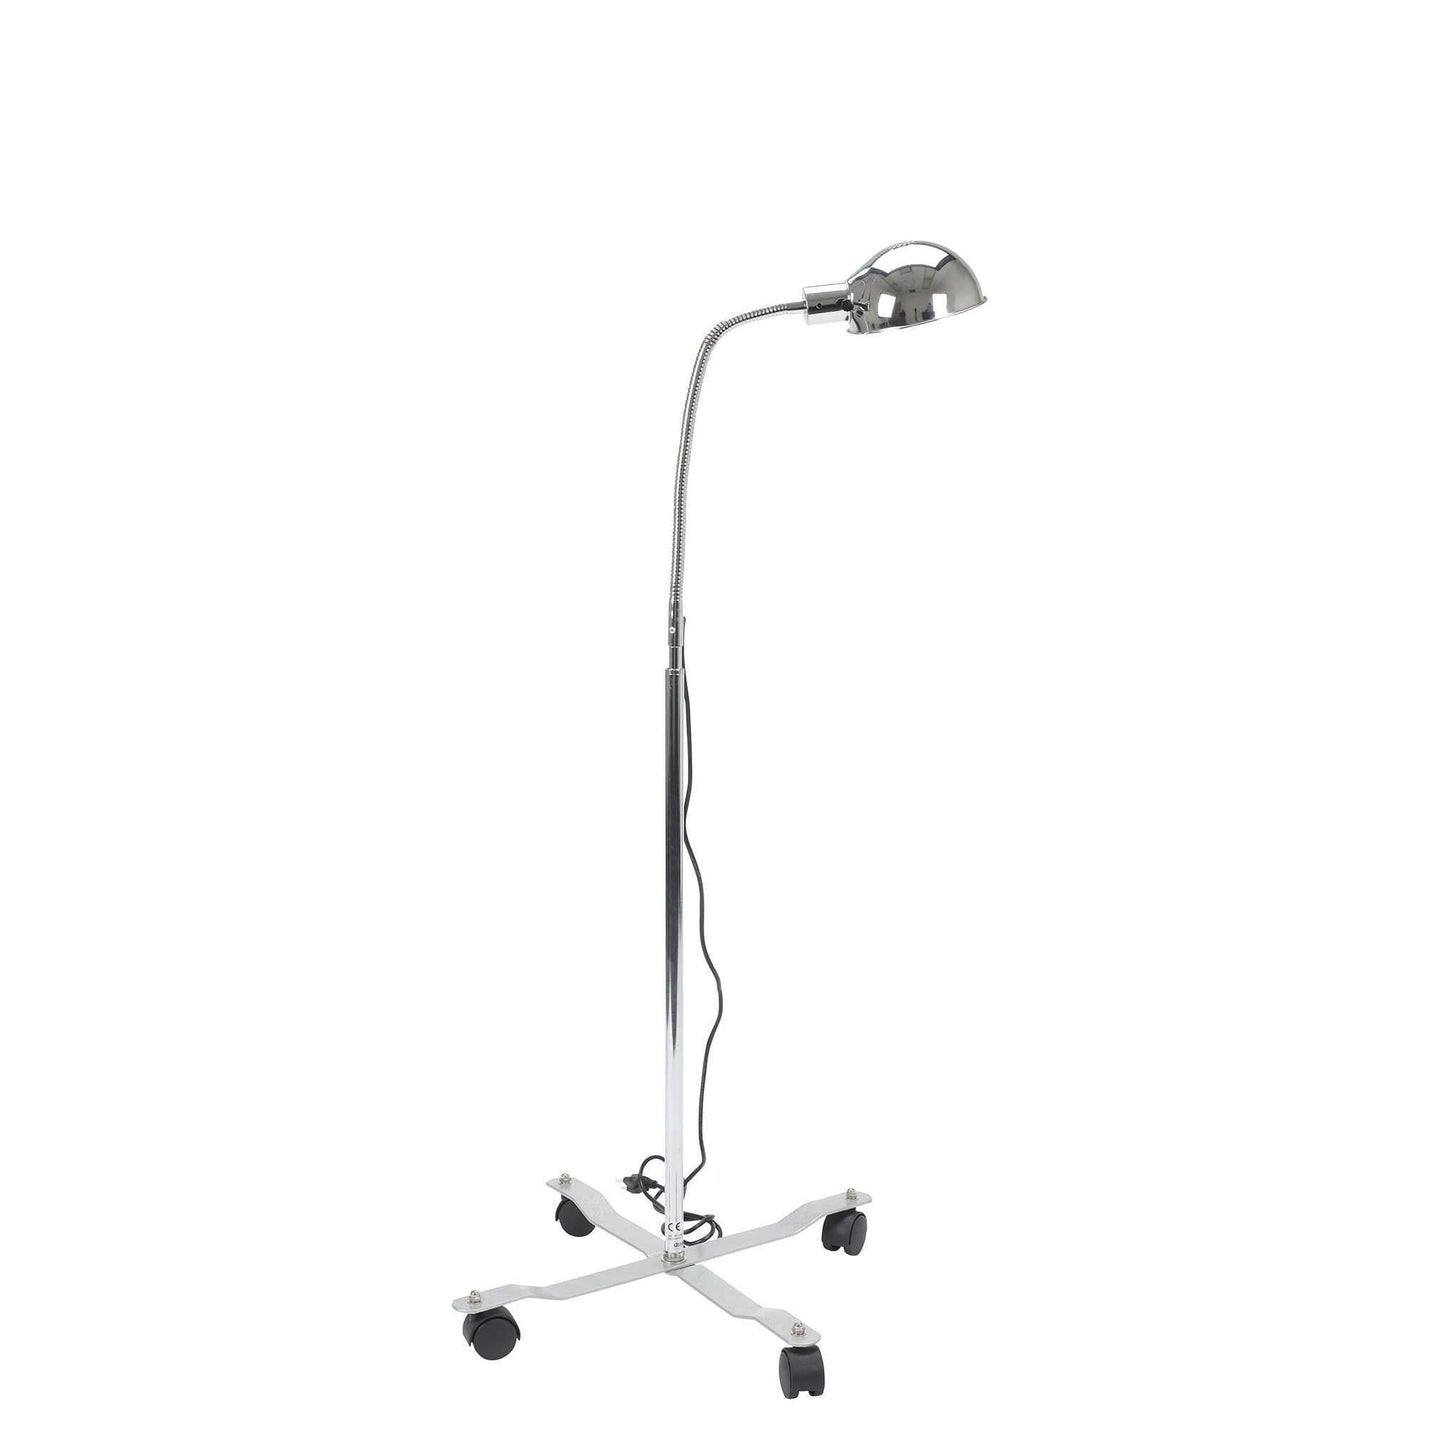 Drive 13408mb Goose Neck Exam Lamp, Dome Style Shade with Mobile Base